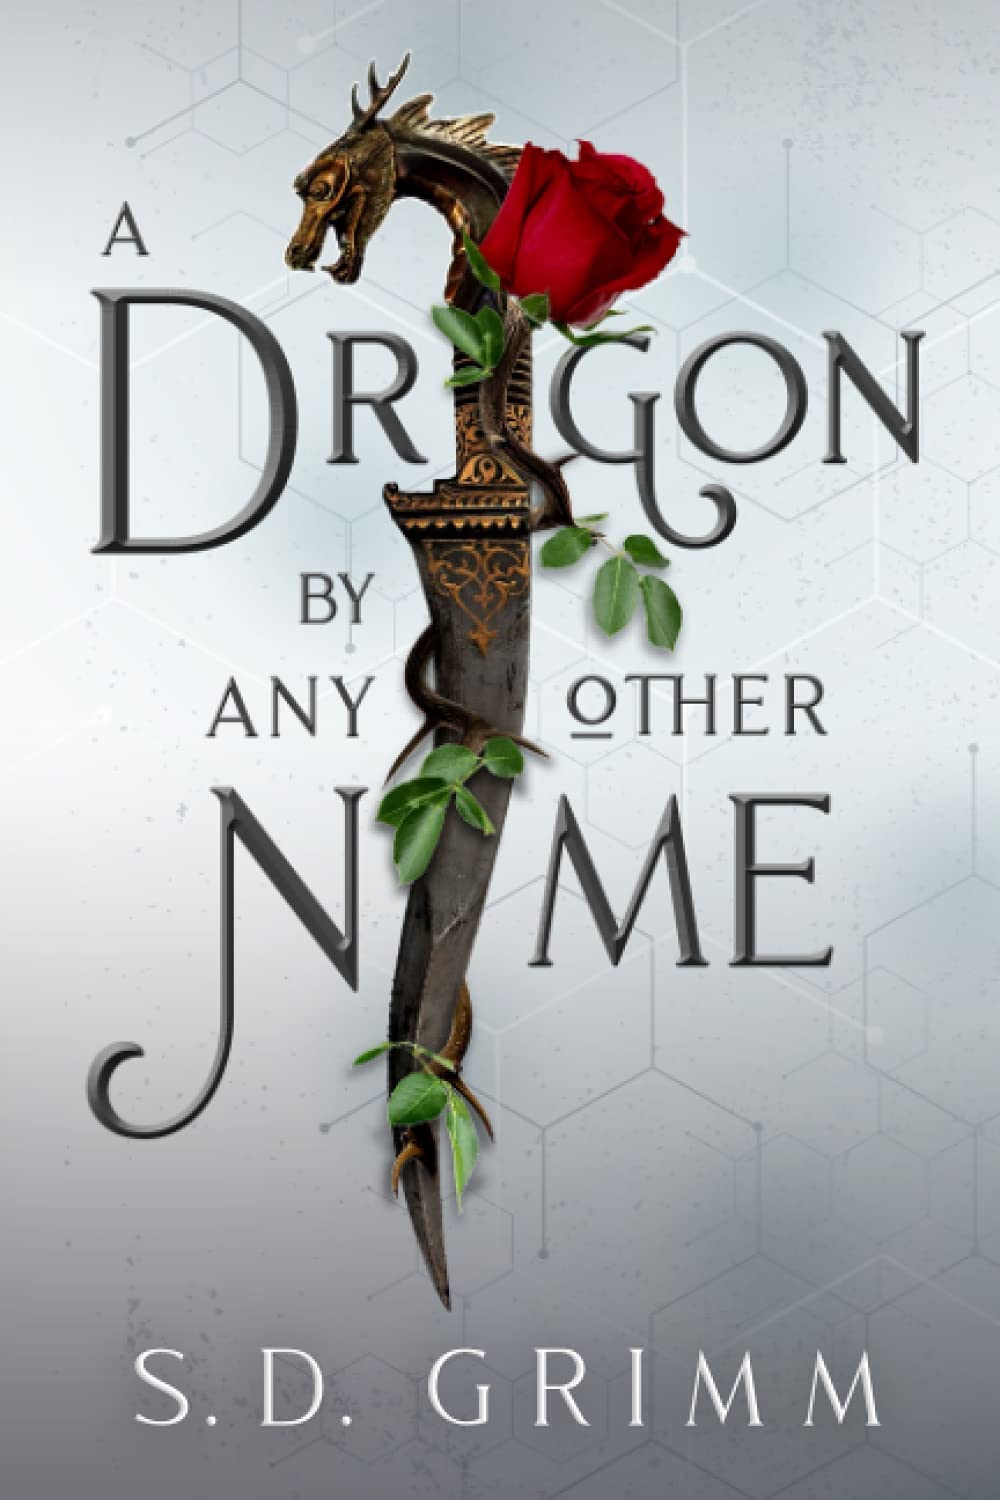 A Dragon by Any Other Name by S. D. Grimm